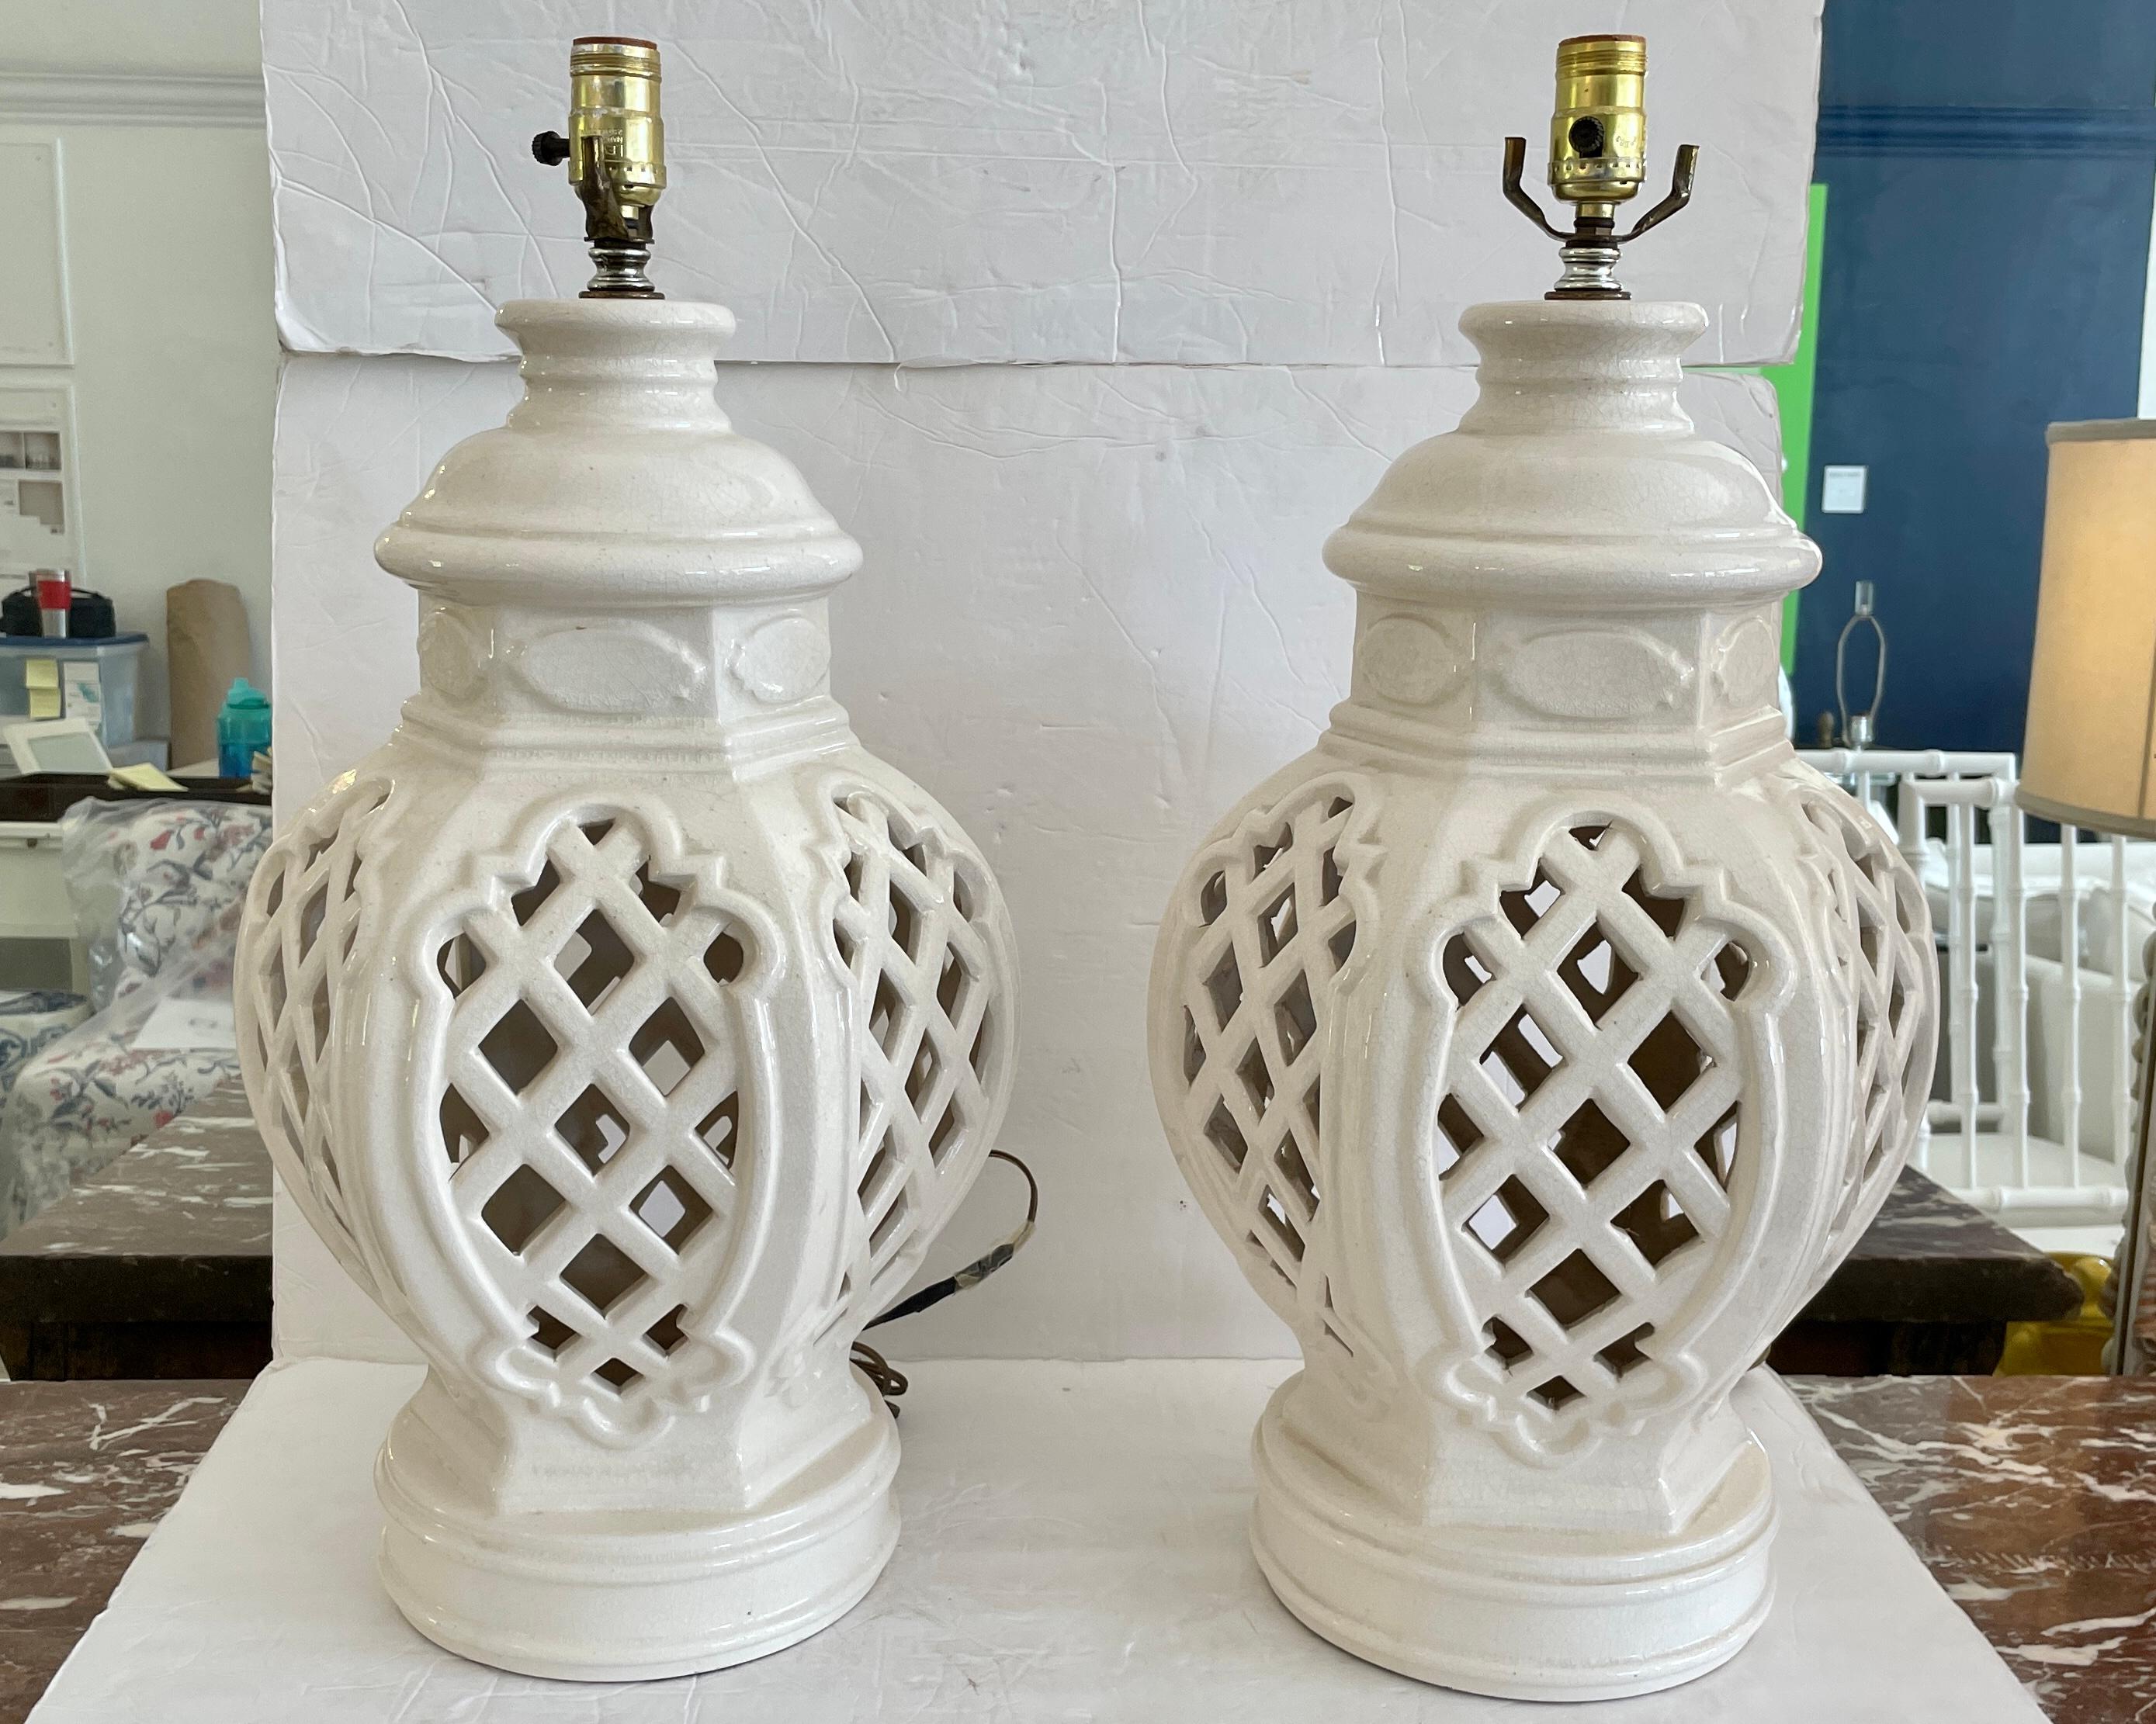 Fun pair of glazed ceramic ginger jar table lamps. Classic ginger jar shape for your interiors and table tops. Just add finials and shades of your choice.